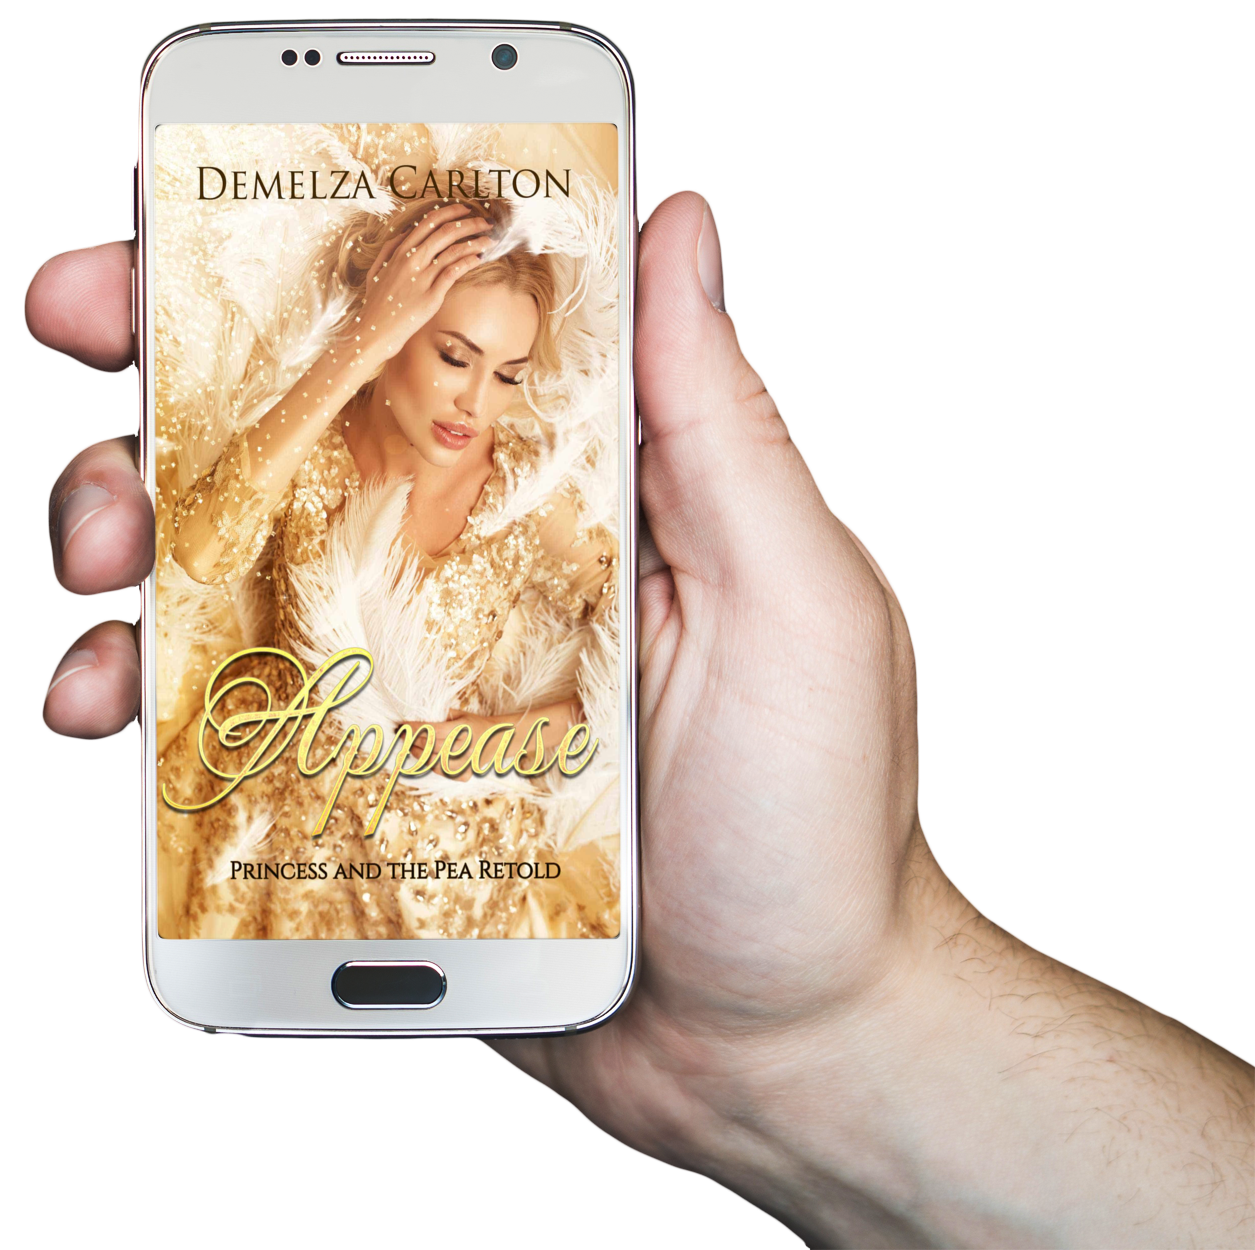 Appease: Princess and the Pea Retold Book 8 in the Romance a Medieval Fairytale series by USA Today Bestselling Author Demelza Carlton ebook